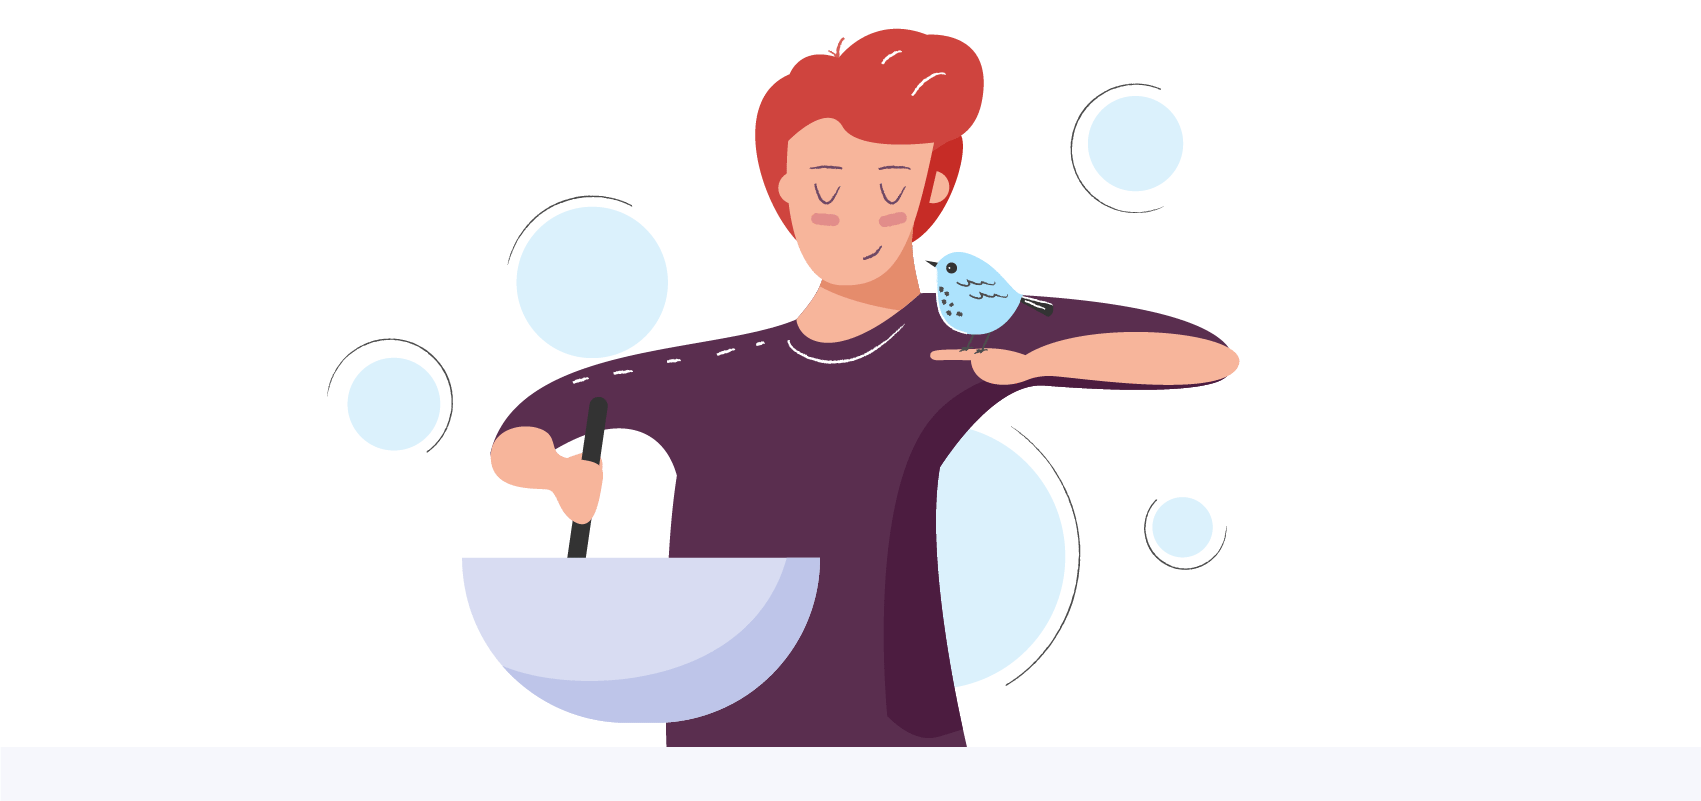 A person stirring the contents of a bowl with a bird on his arm. Illustration